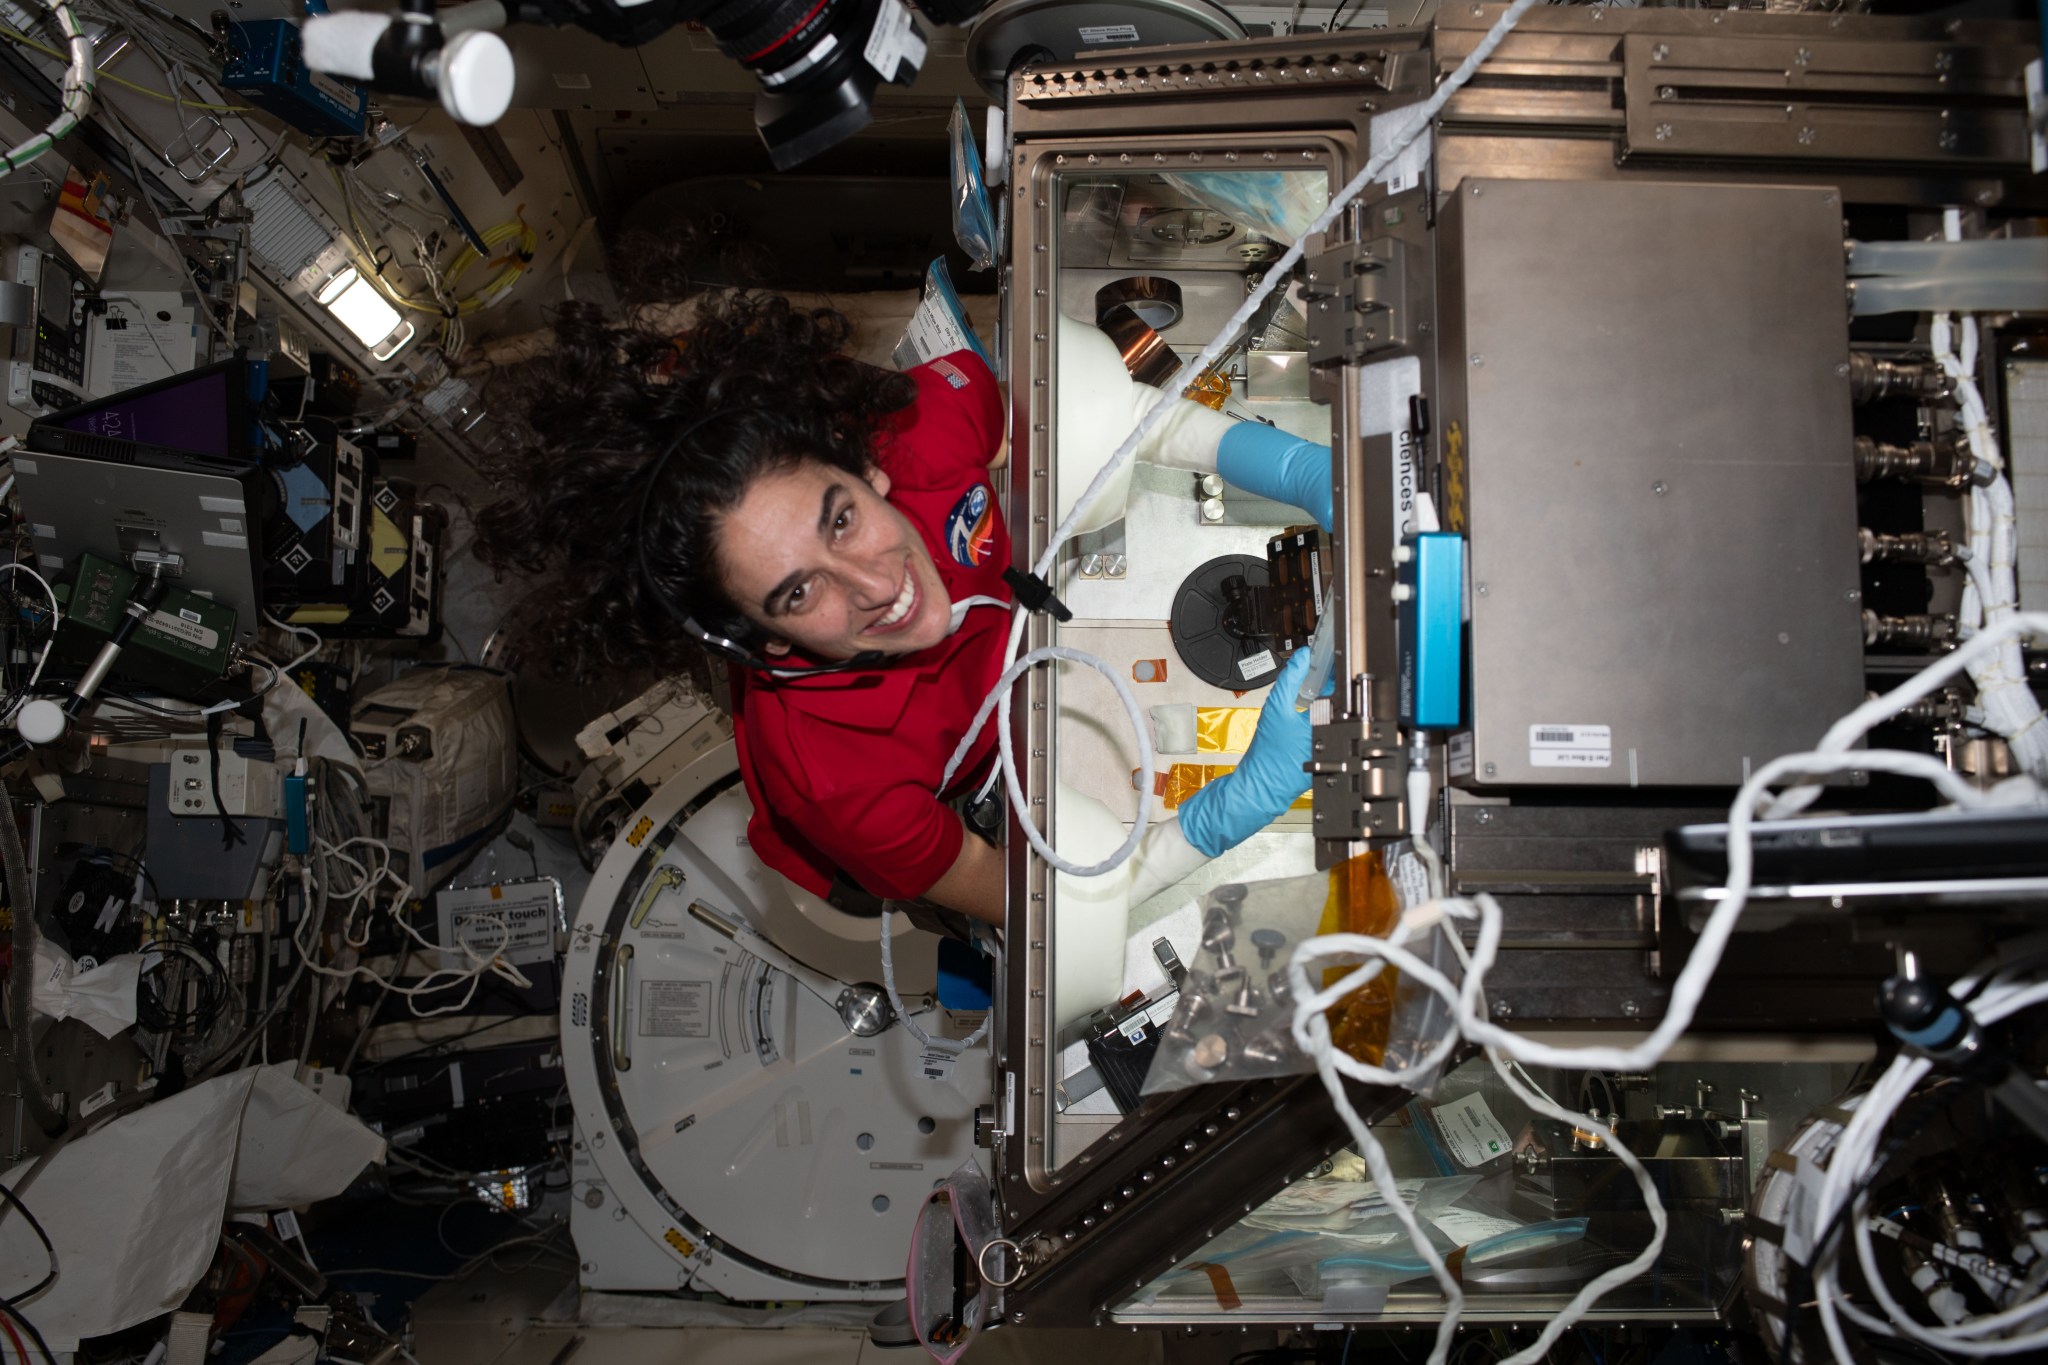 Jasmine Moghbeli, wearing a red polo shirt and a headset, looks up and smiles at the camera. Her arms are inside a large, clear glovebox used to contain experiments. Equipment, laptops, cords, and lights cover the walls behind her.